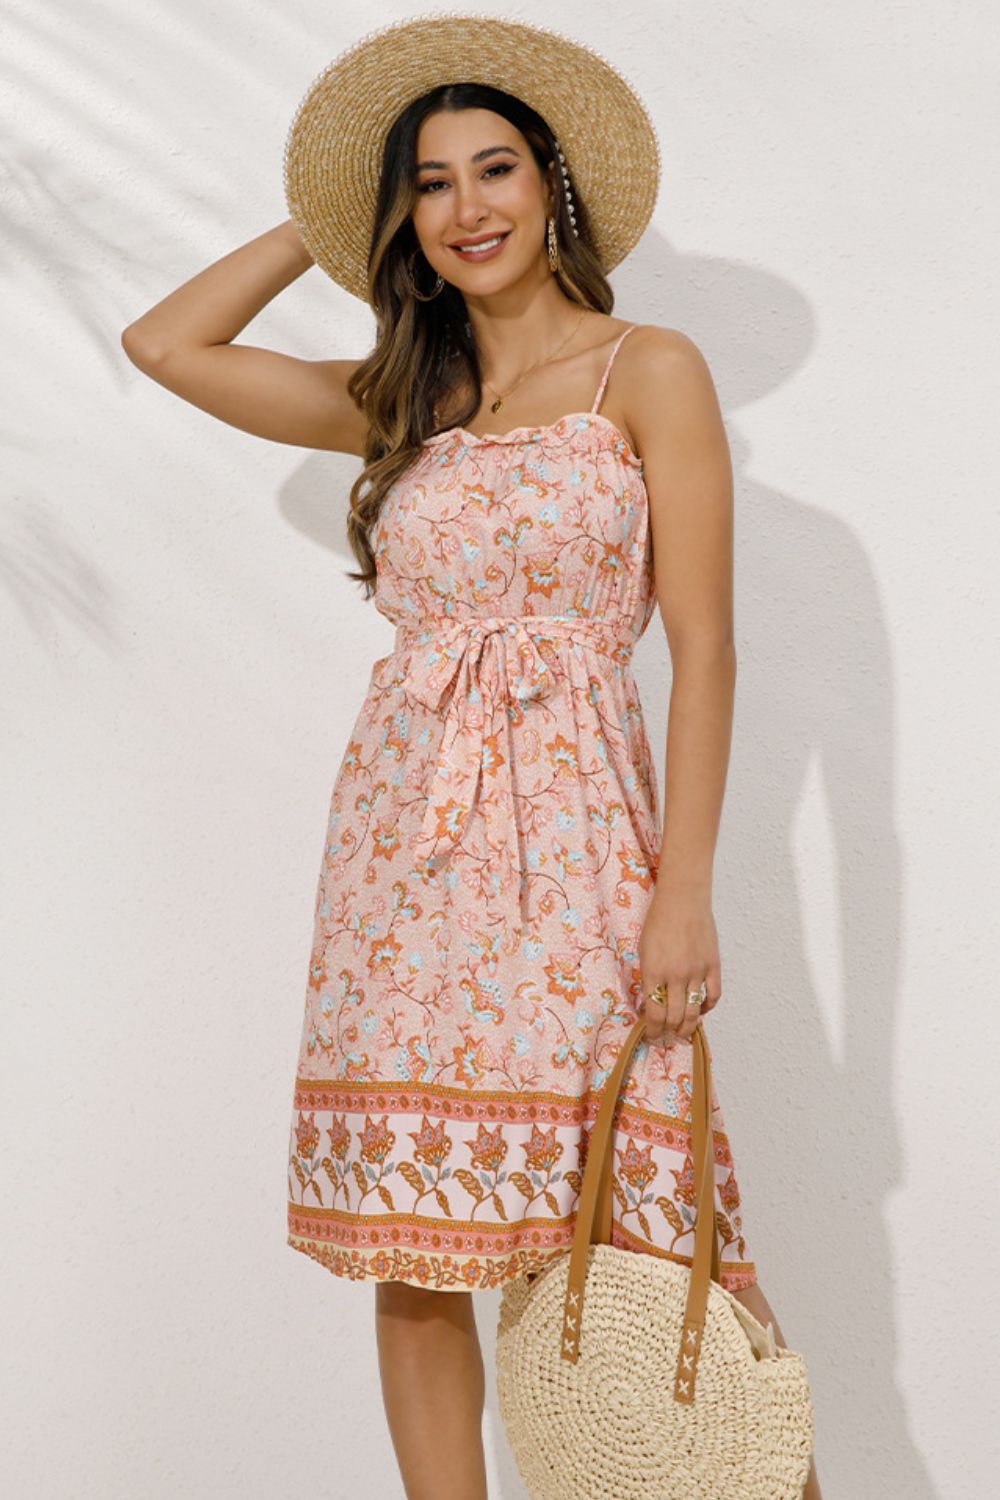 Catch The Moment Bohemian Floral Dress - pink  floral knee length dress with spaghetti straps. #Firefly Lane Boutique1